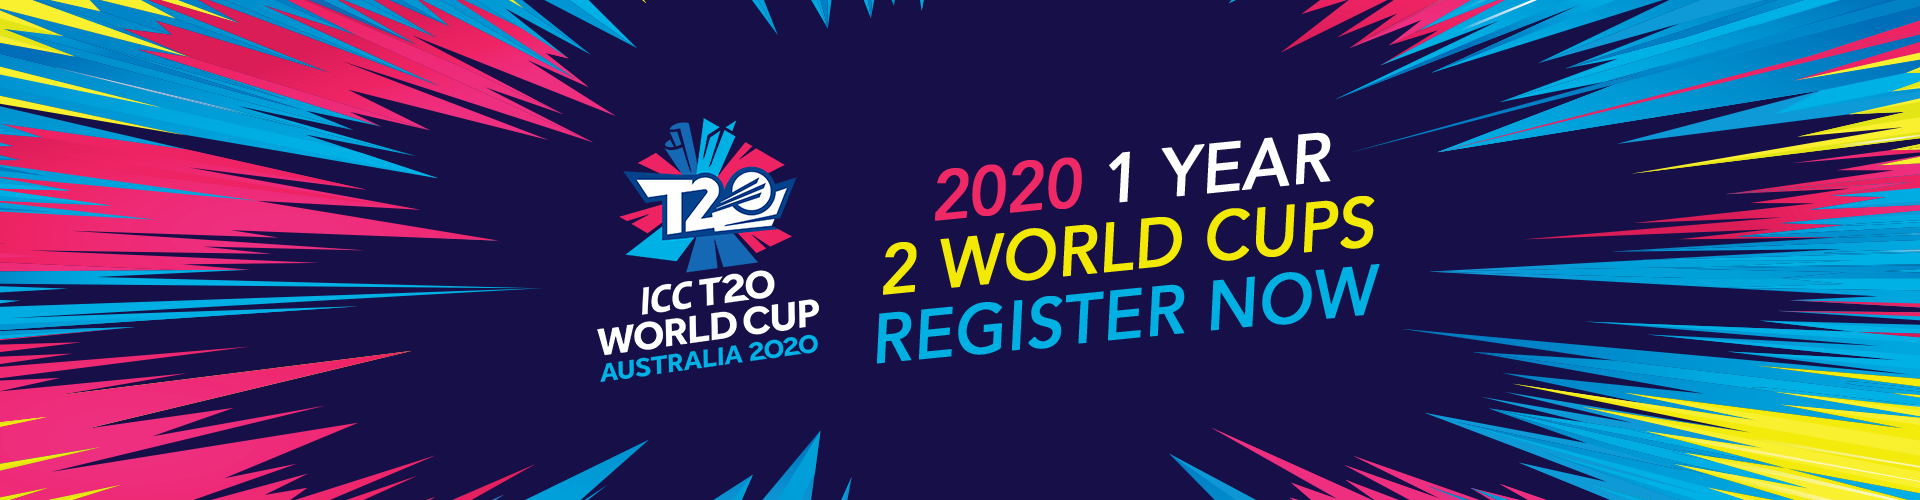 t20 world cup banner